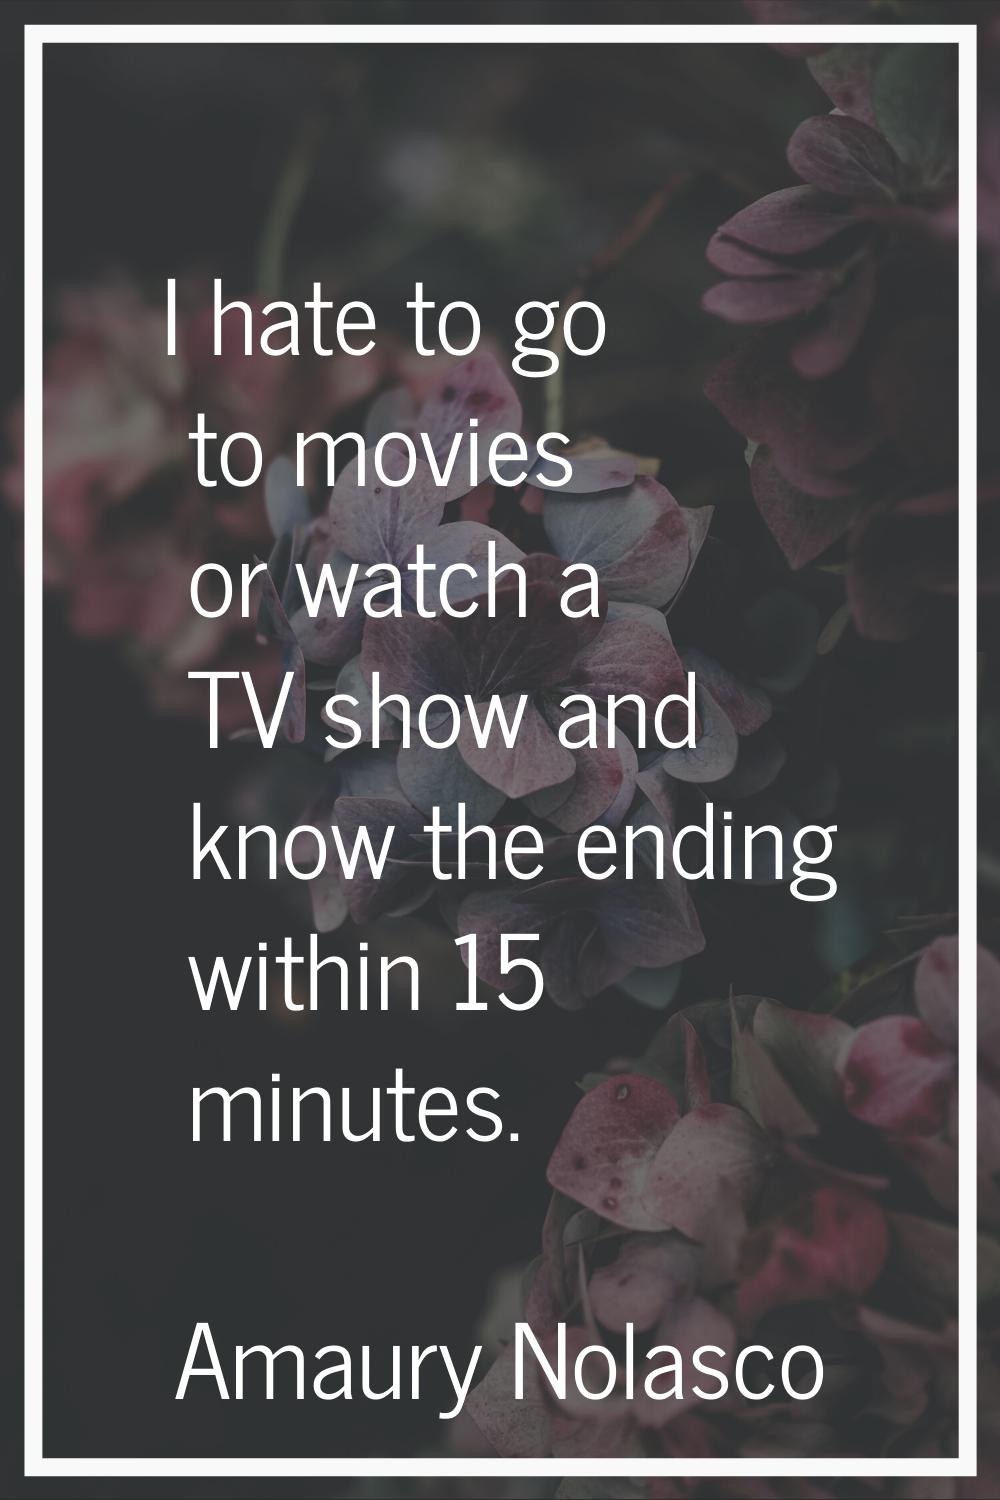 I hate to go to movies or watch a TV show and know the ending within 15 minutes.